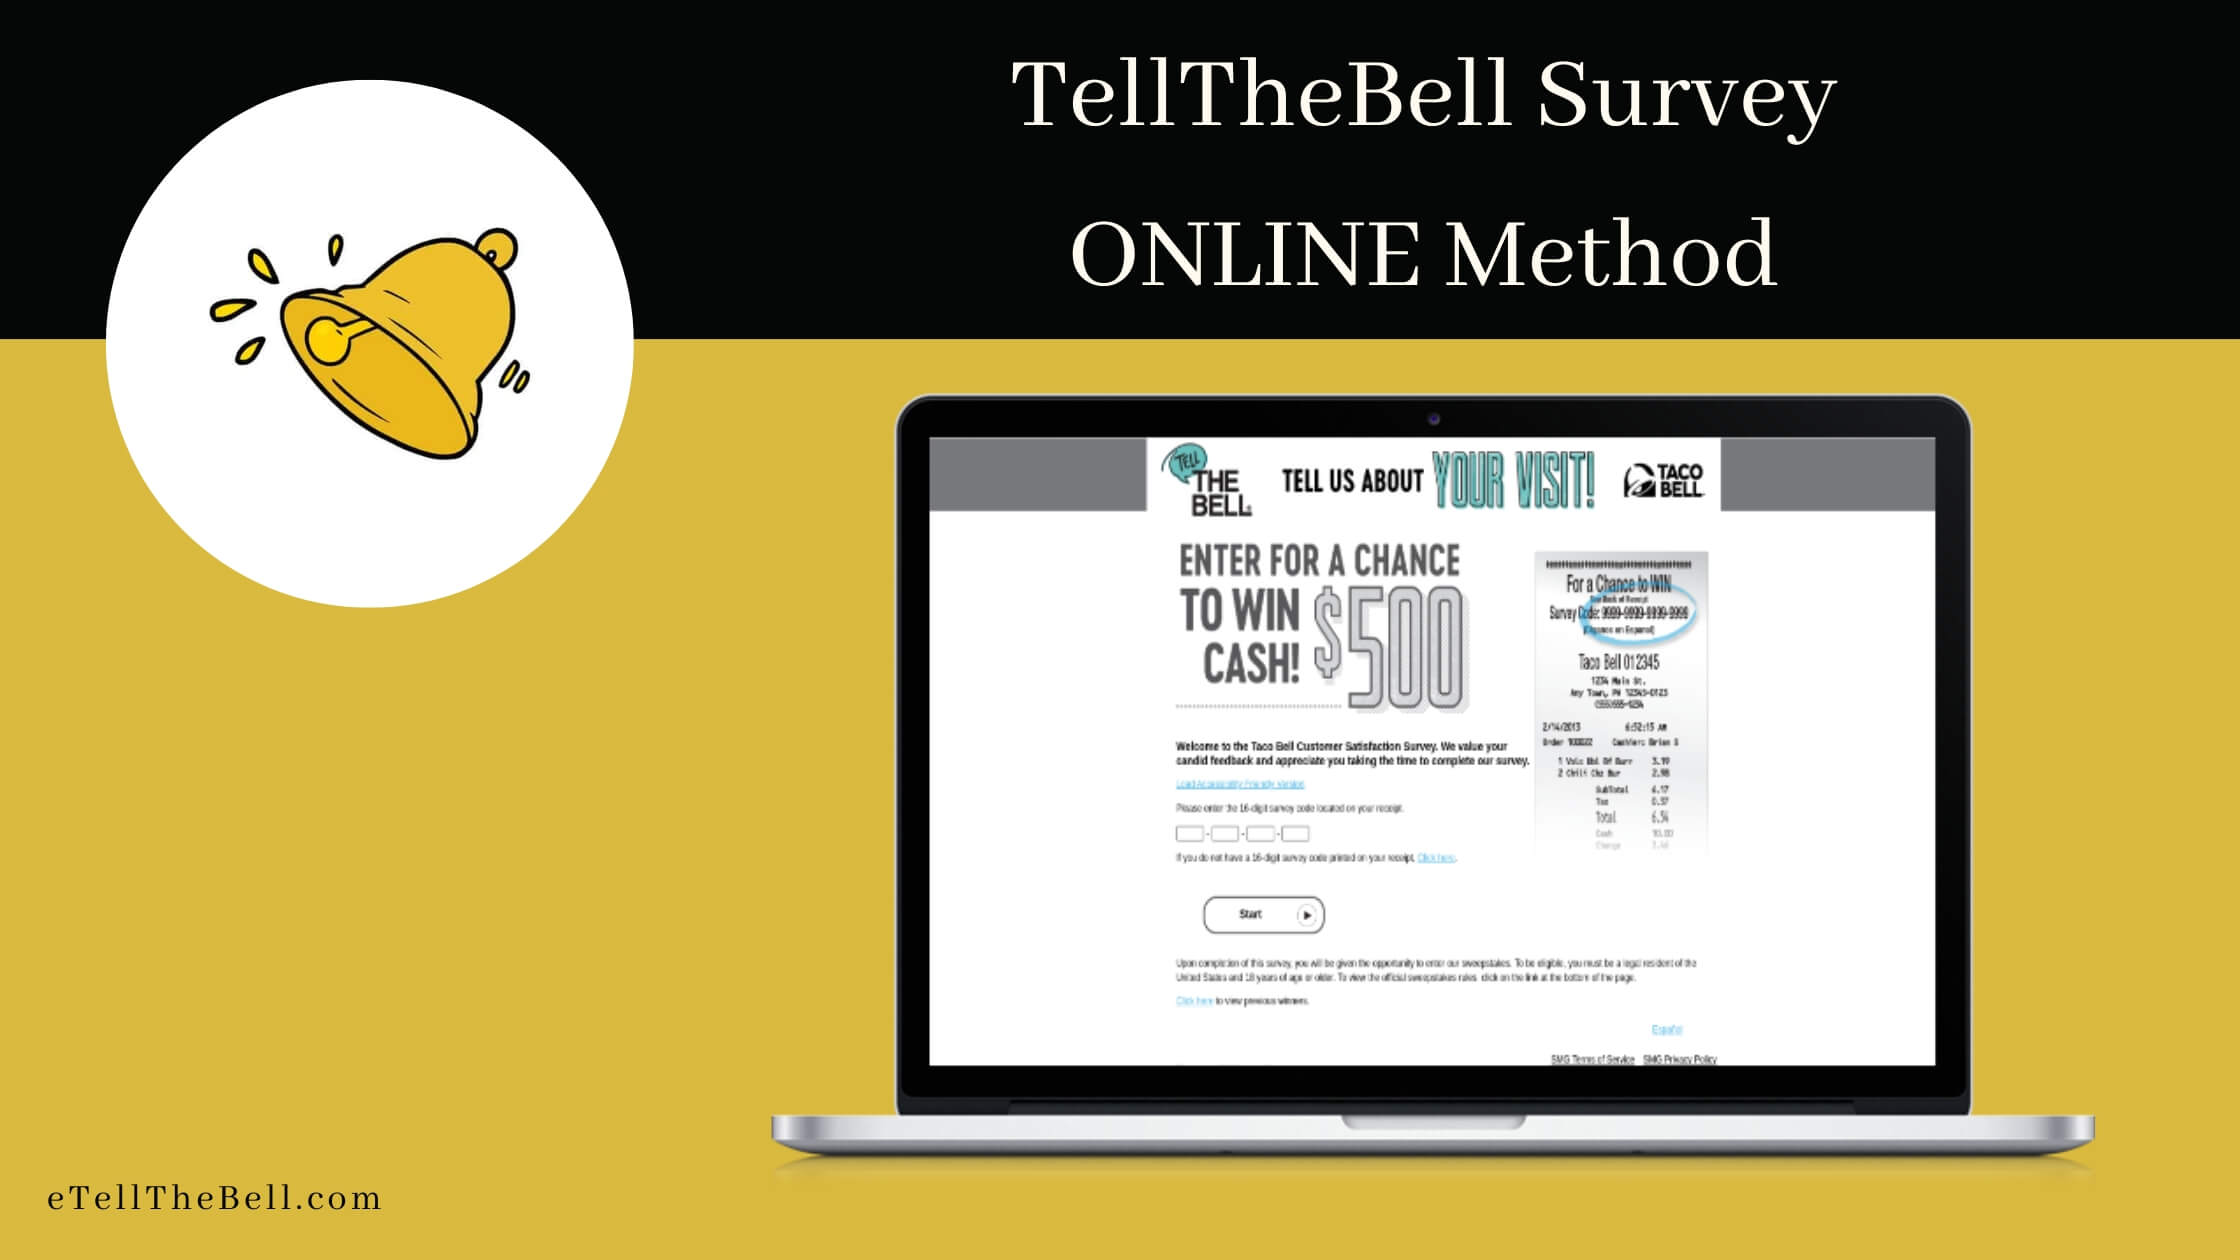 Visit the official Taco Bell Survey website at www.tellthebell.com